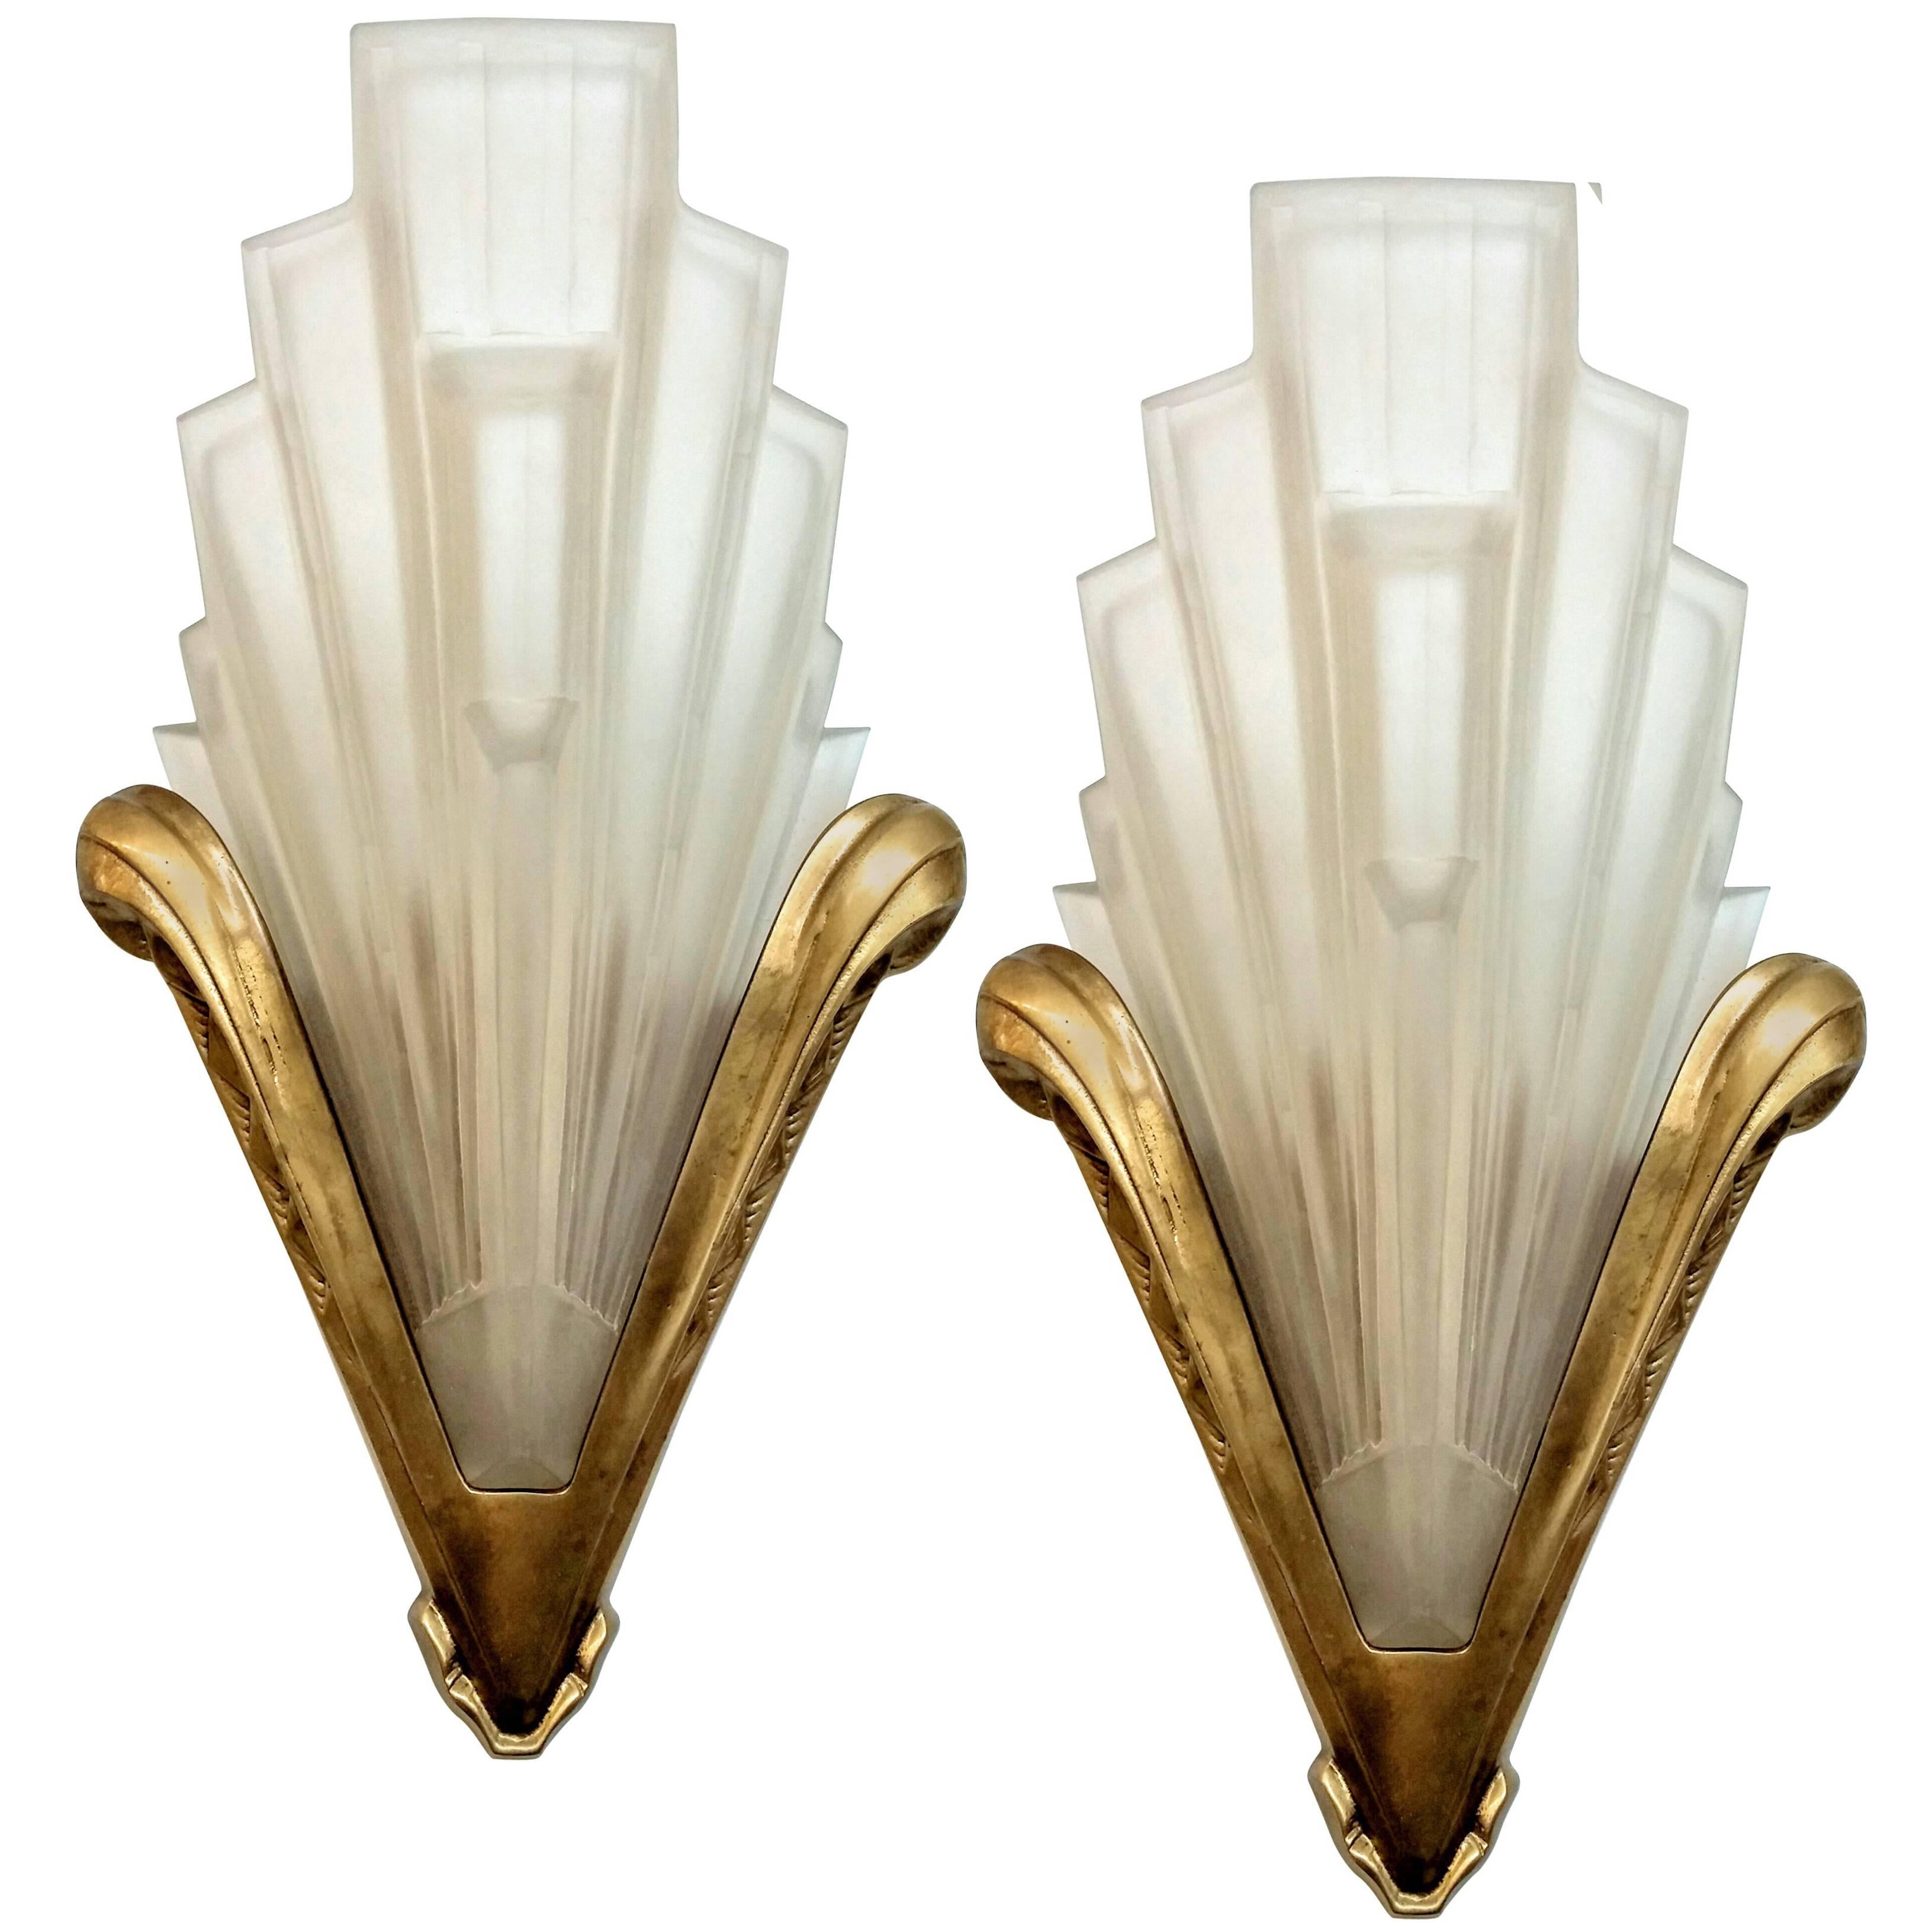 French Art Deco Wall Sconces signed by Sabino